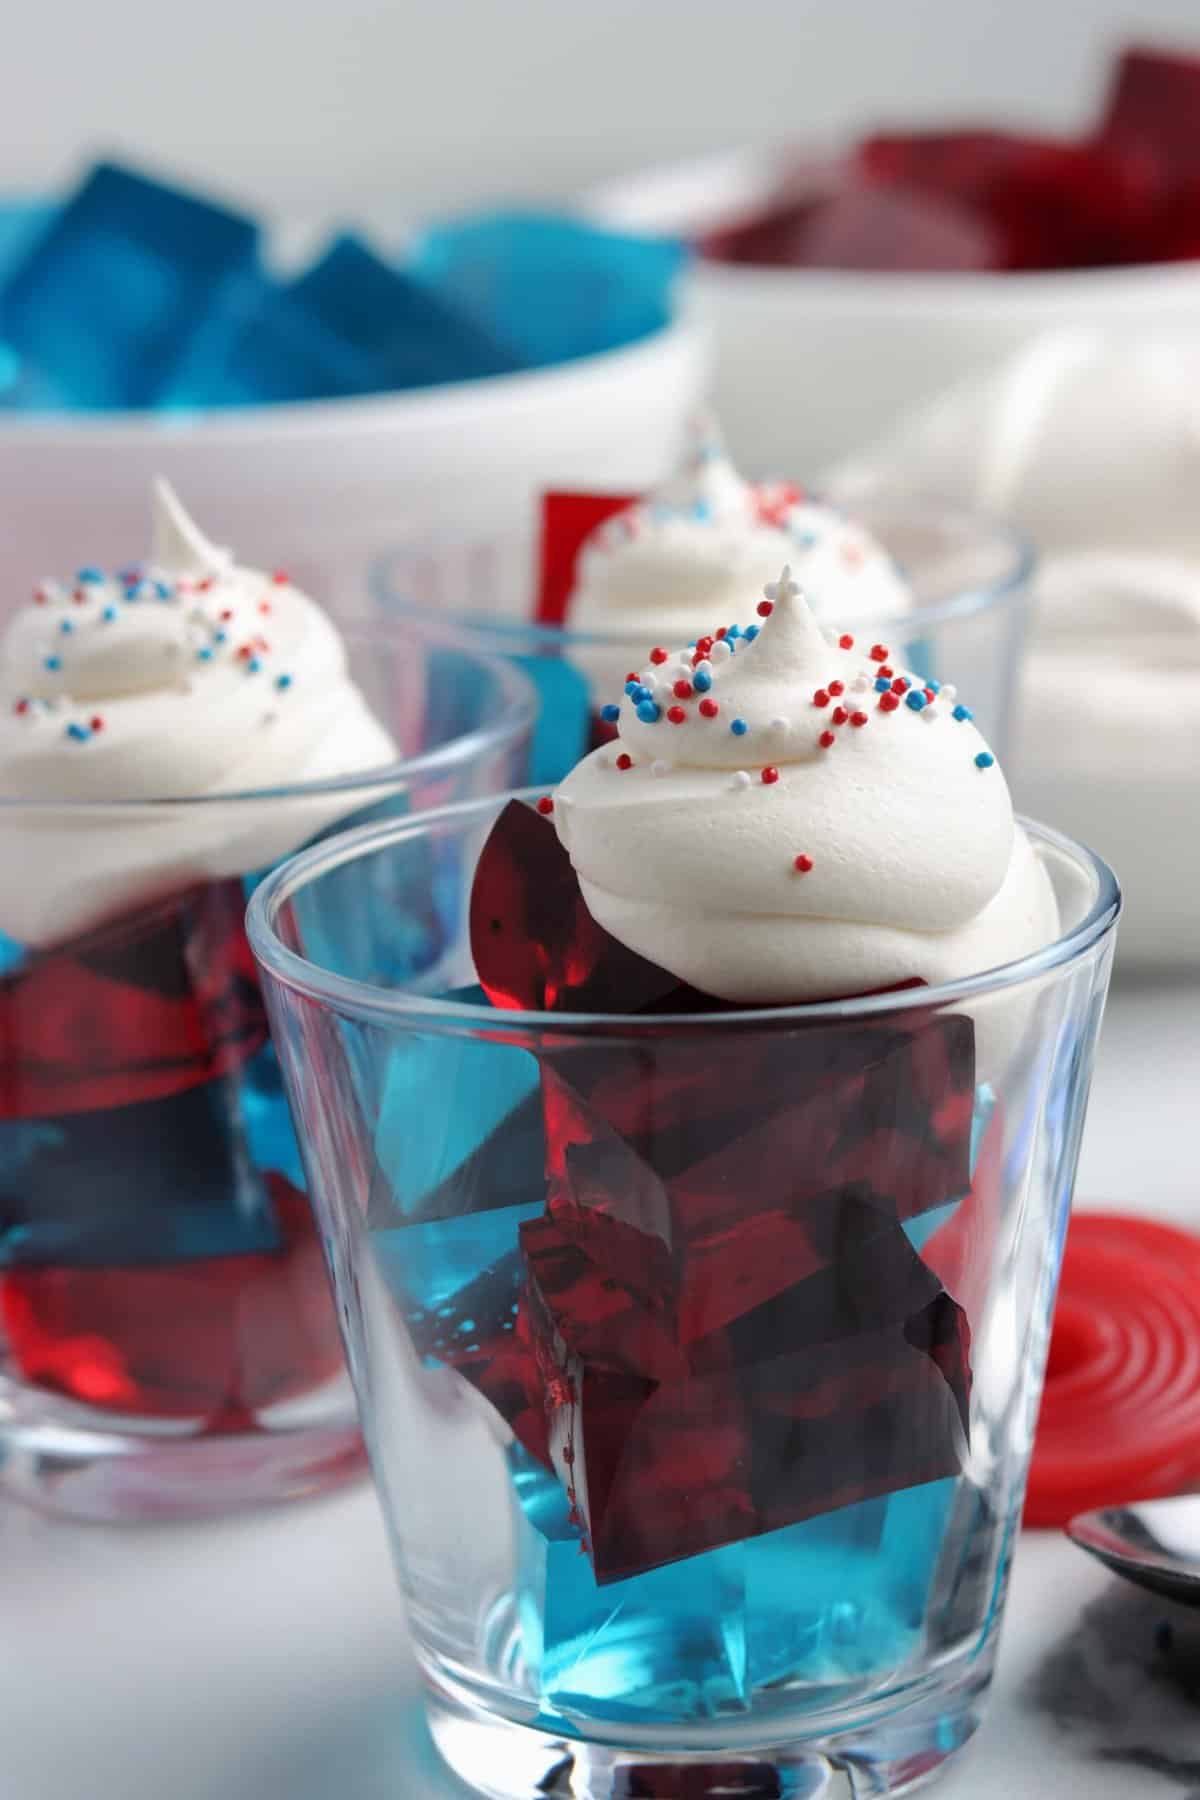  Add a little excitement to your dessert table with these creamy jigglers.